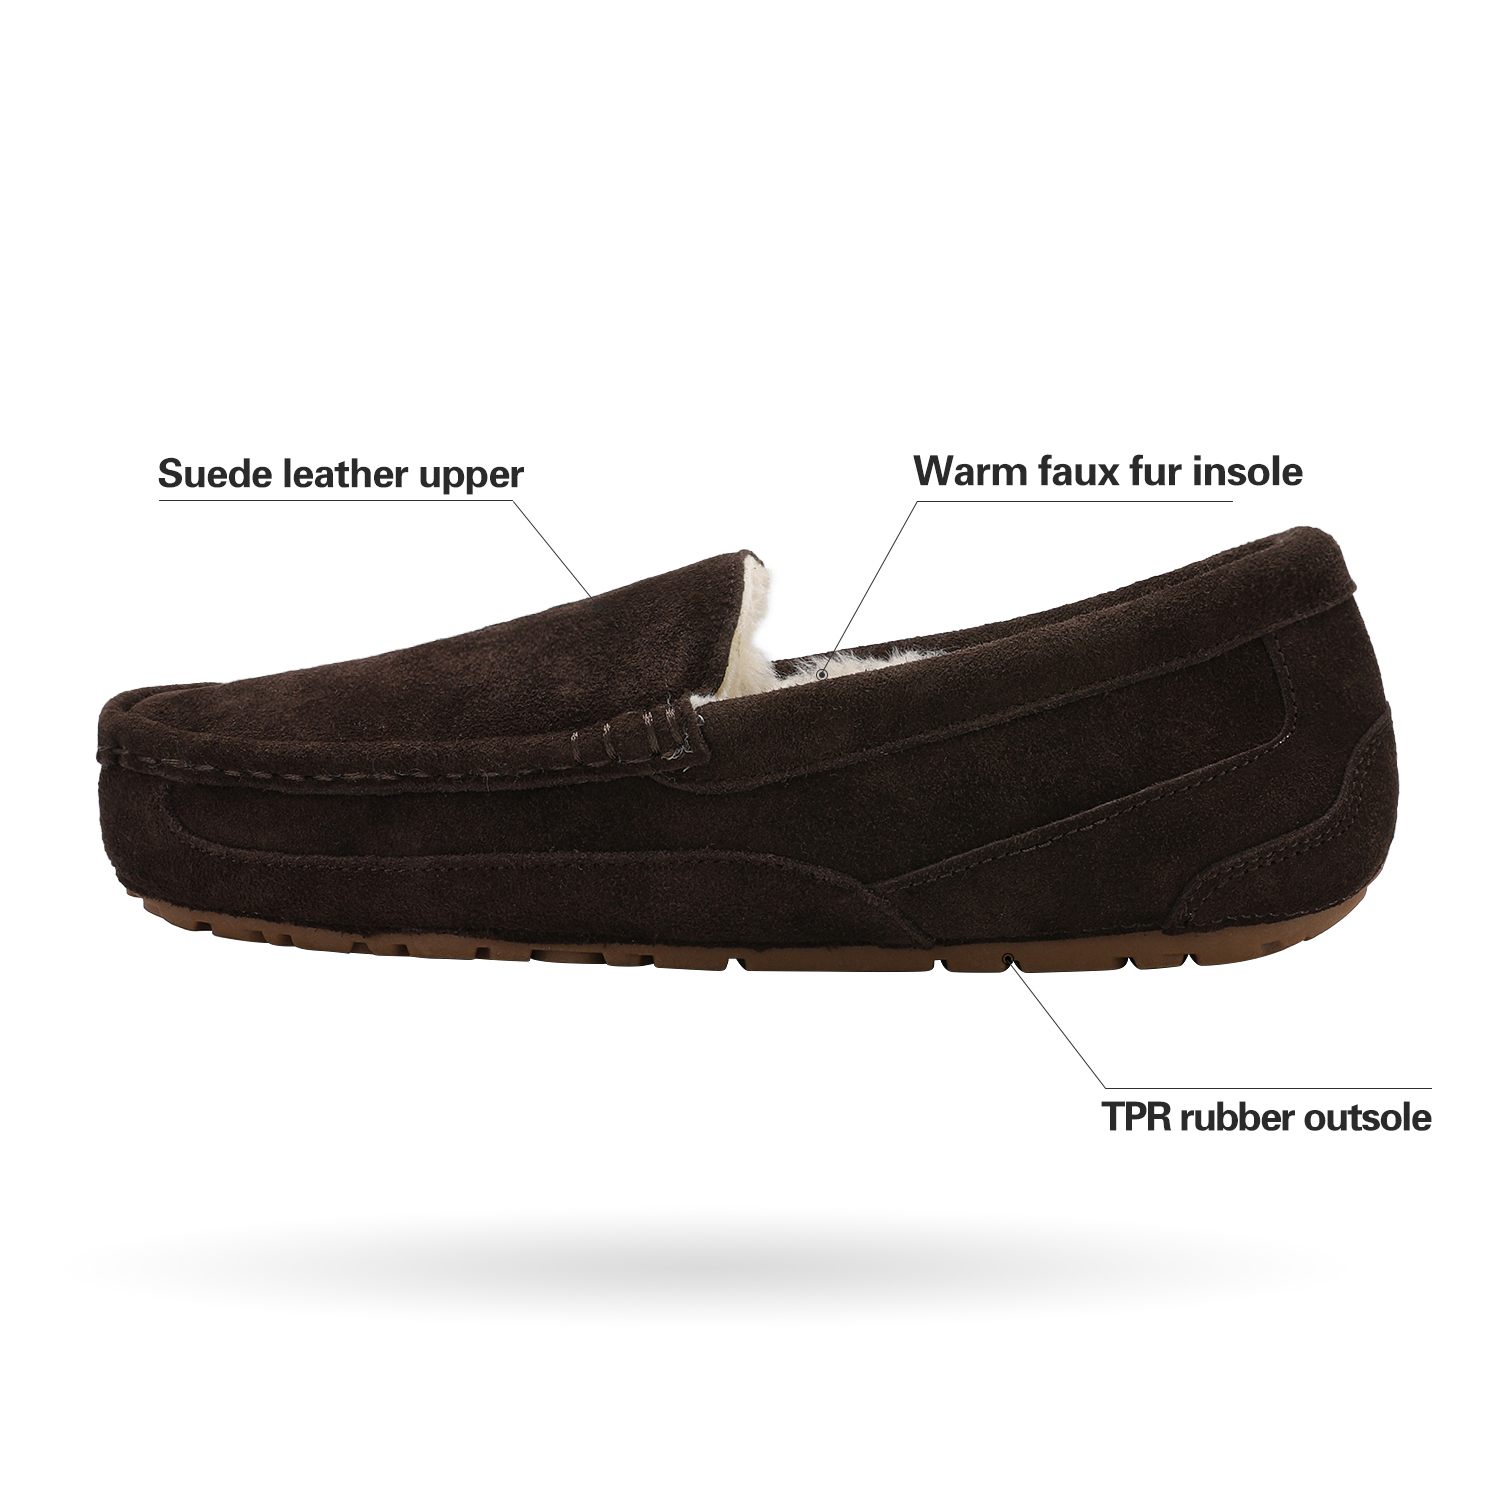 Dream Pairs New Soft Mens Au-Loafer Indoor Warm Moccasins Slippers Flats Shoes Au-Loafer-01 Brown Size 8 - image 2 of 4